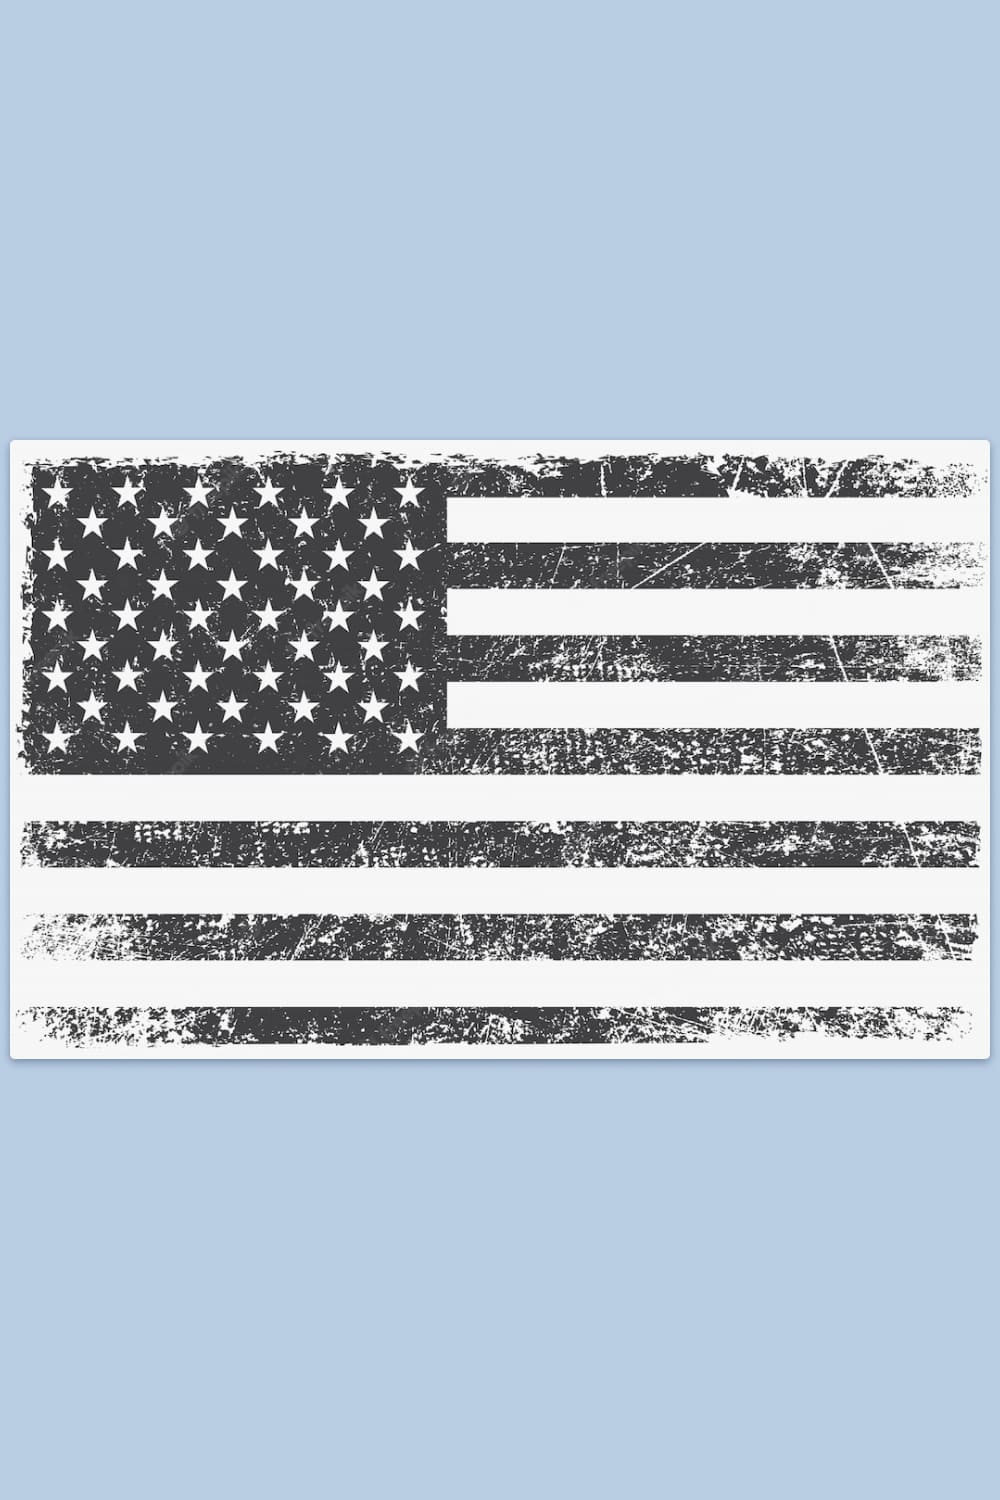 American flag in black and white.